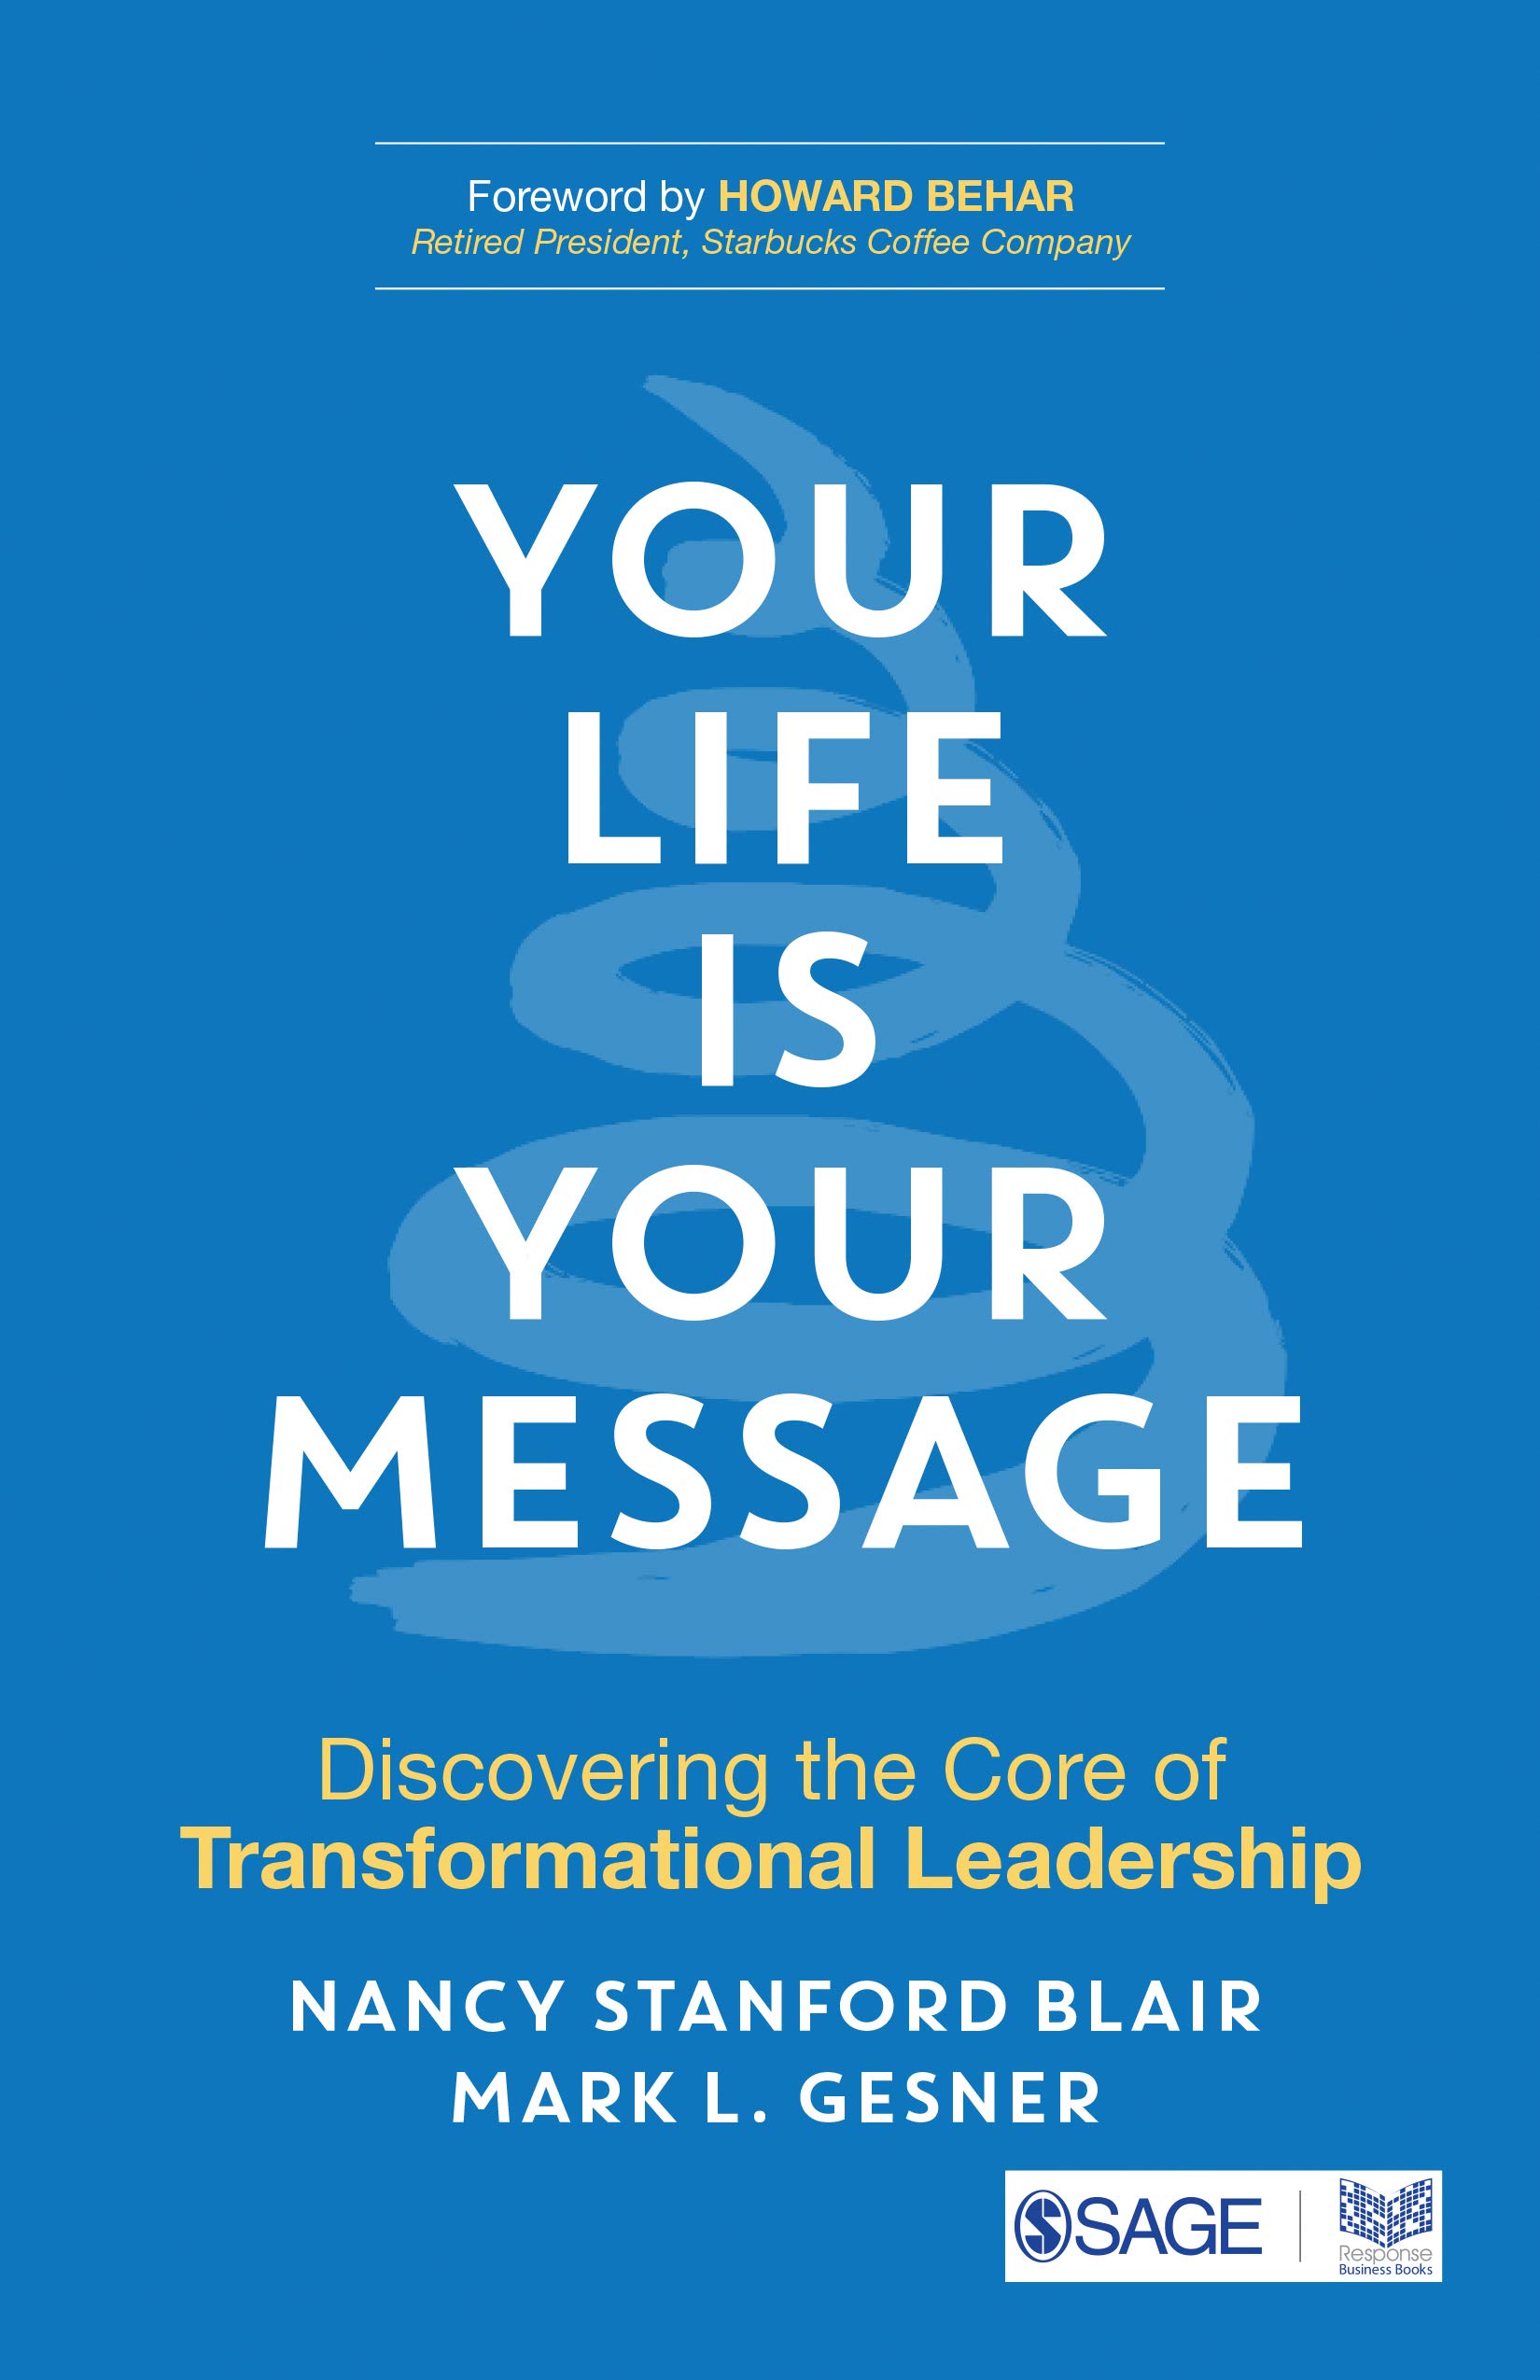 Your Life is Your Message | Nancy Stanford Blair, Mark L. Gesner image